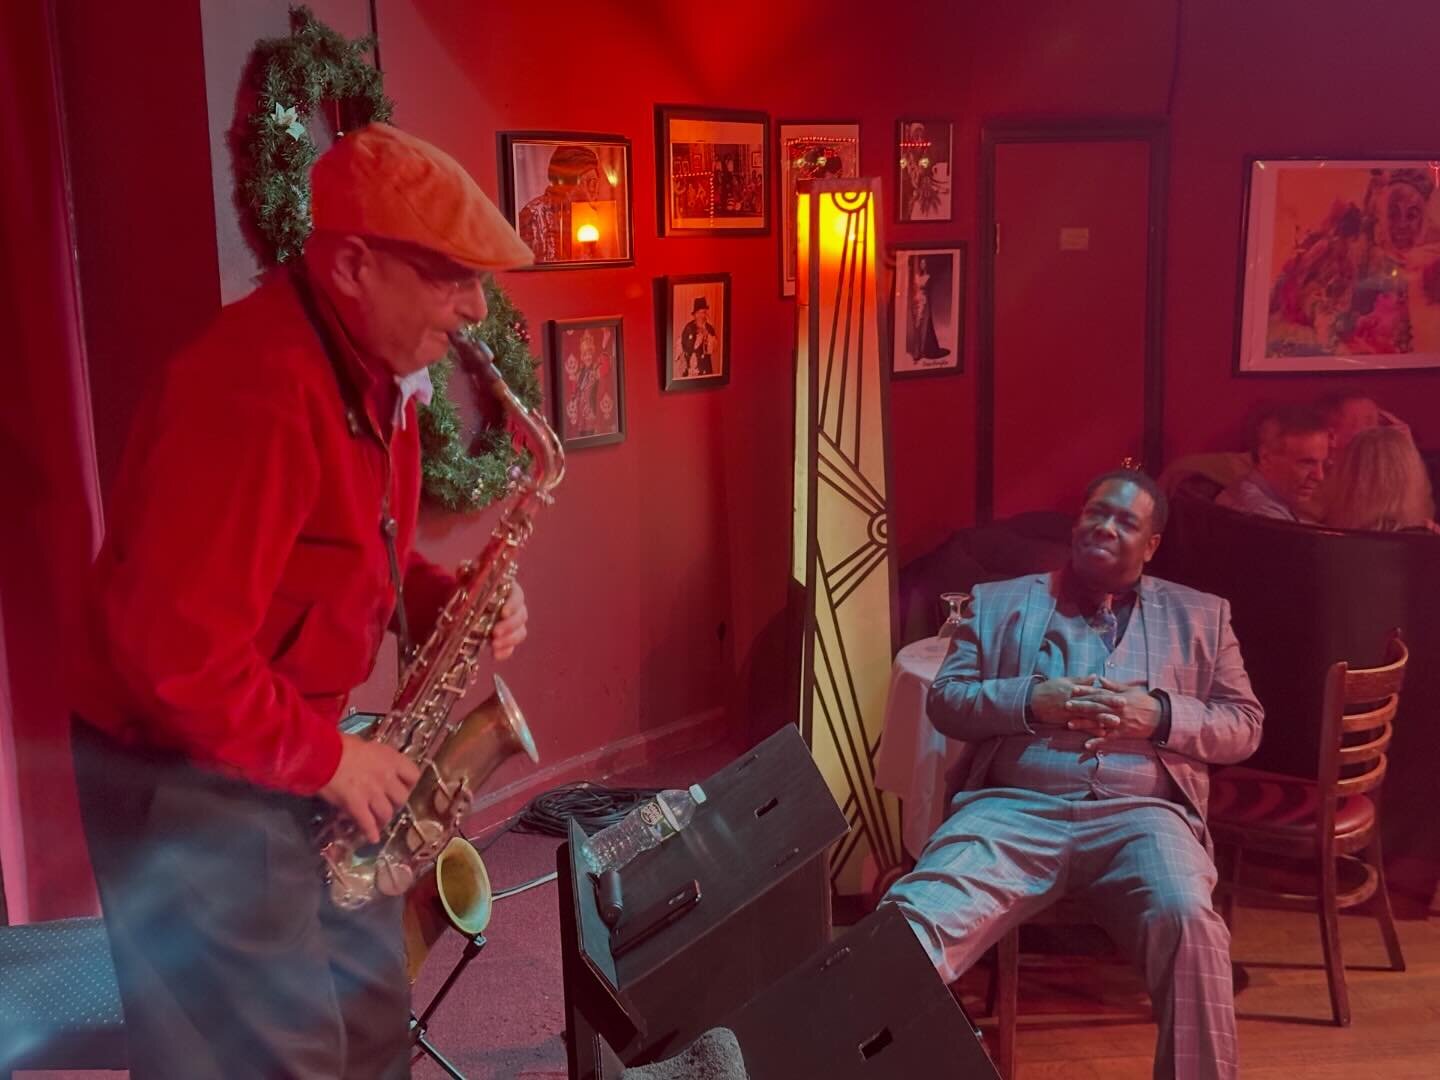 @readyforfreddie has the best seat in the house to admire saxophonist Michael Hashim&rsquo;s melodic handiwork on &ldquo;I Can&rsquo;t Get Started&rdquo;